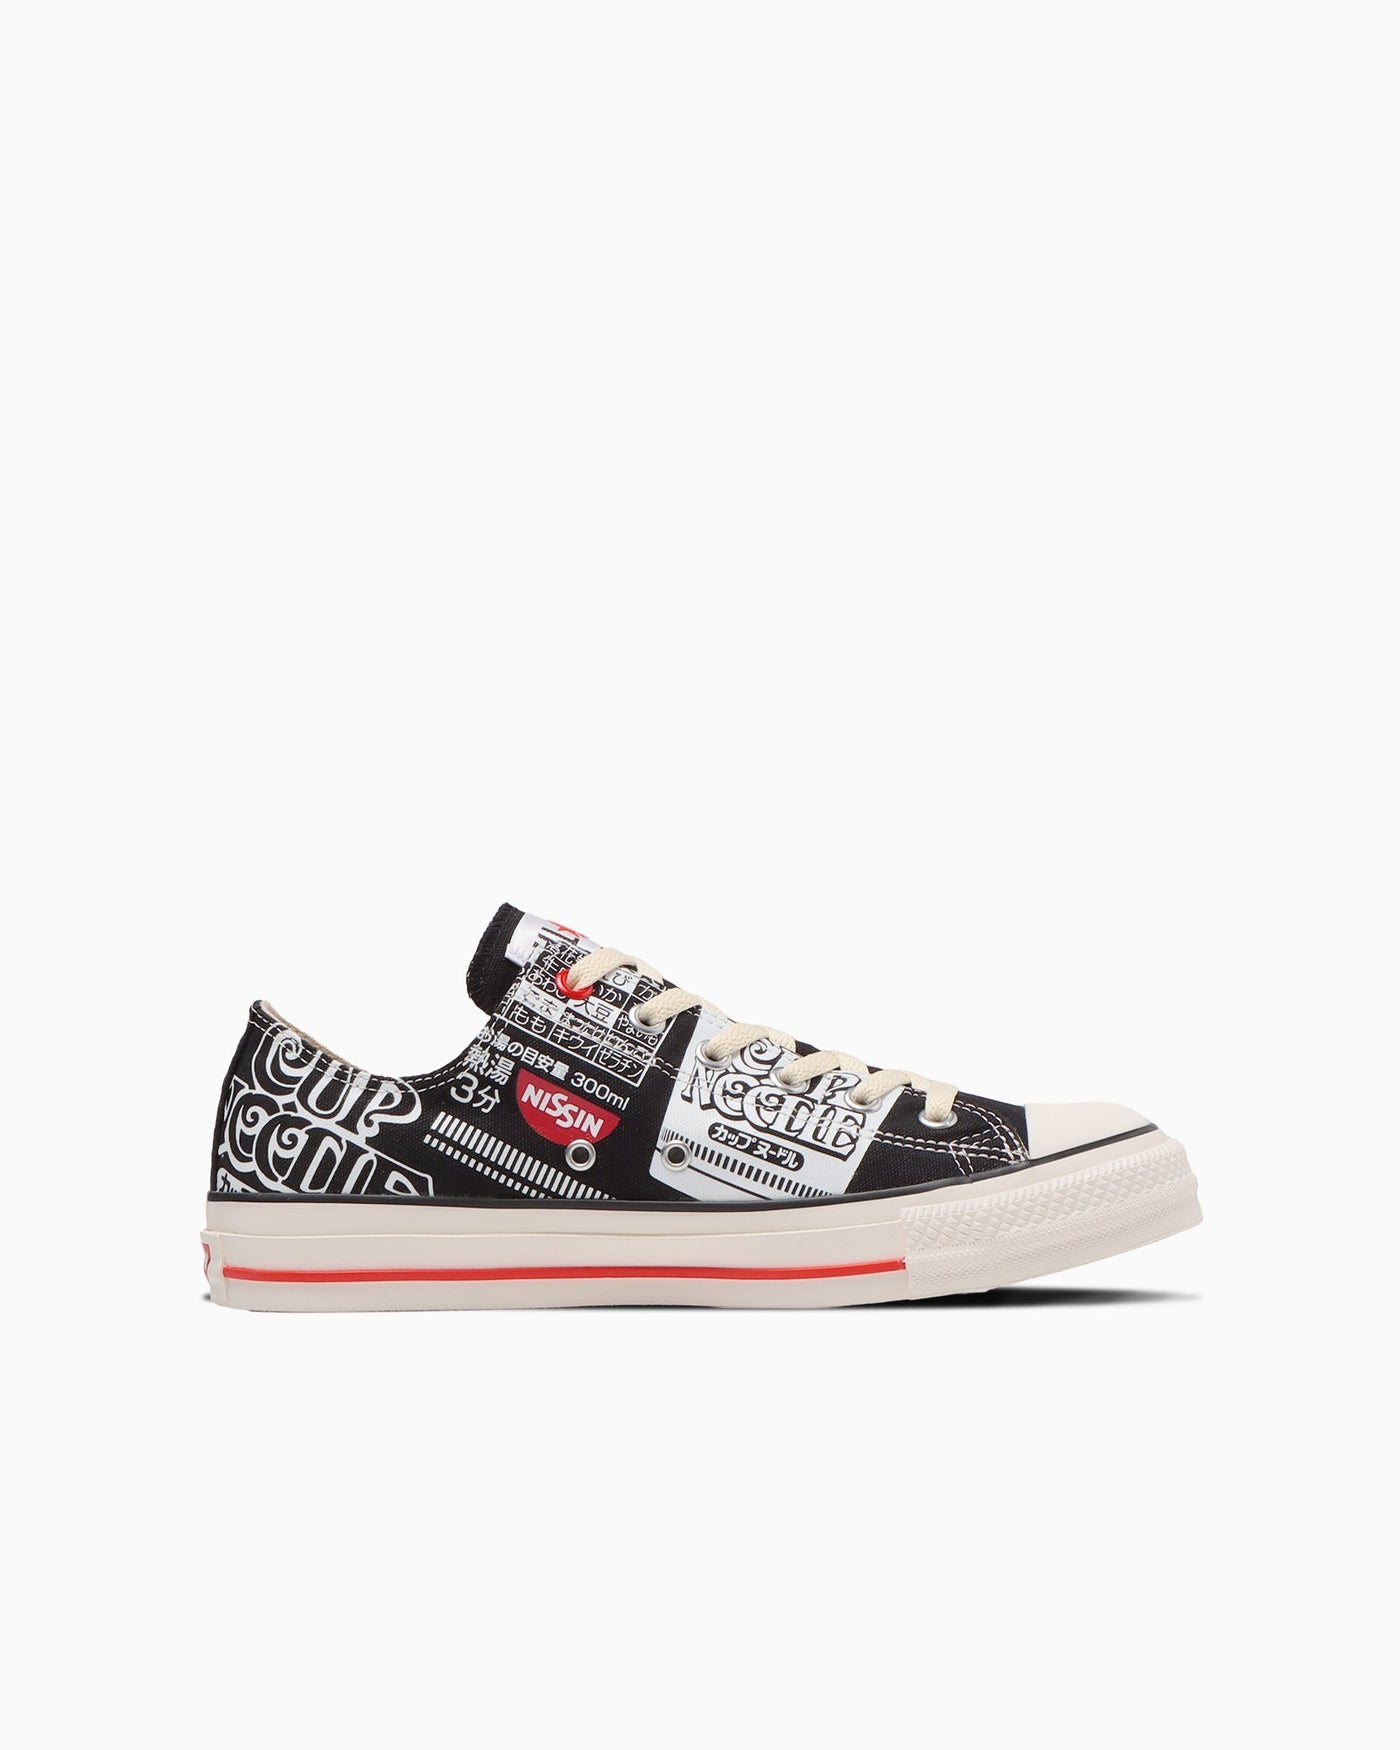 CONVERSE ALL STAR CUPNOODLE SLIP OX 22.5